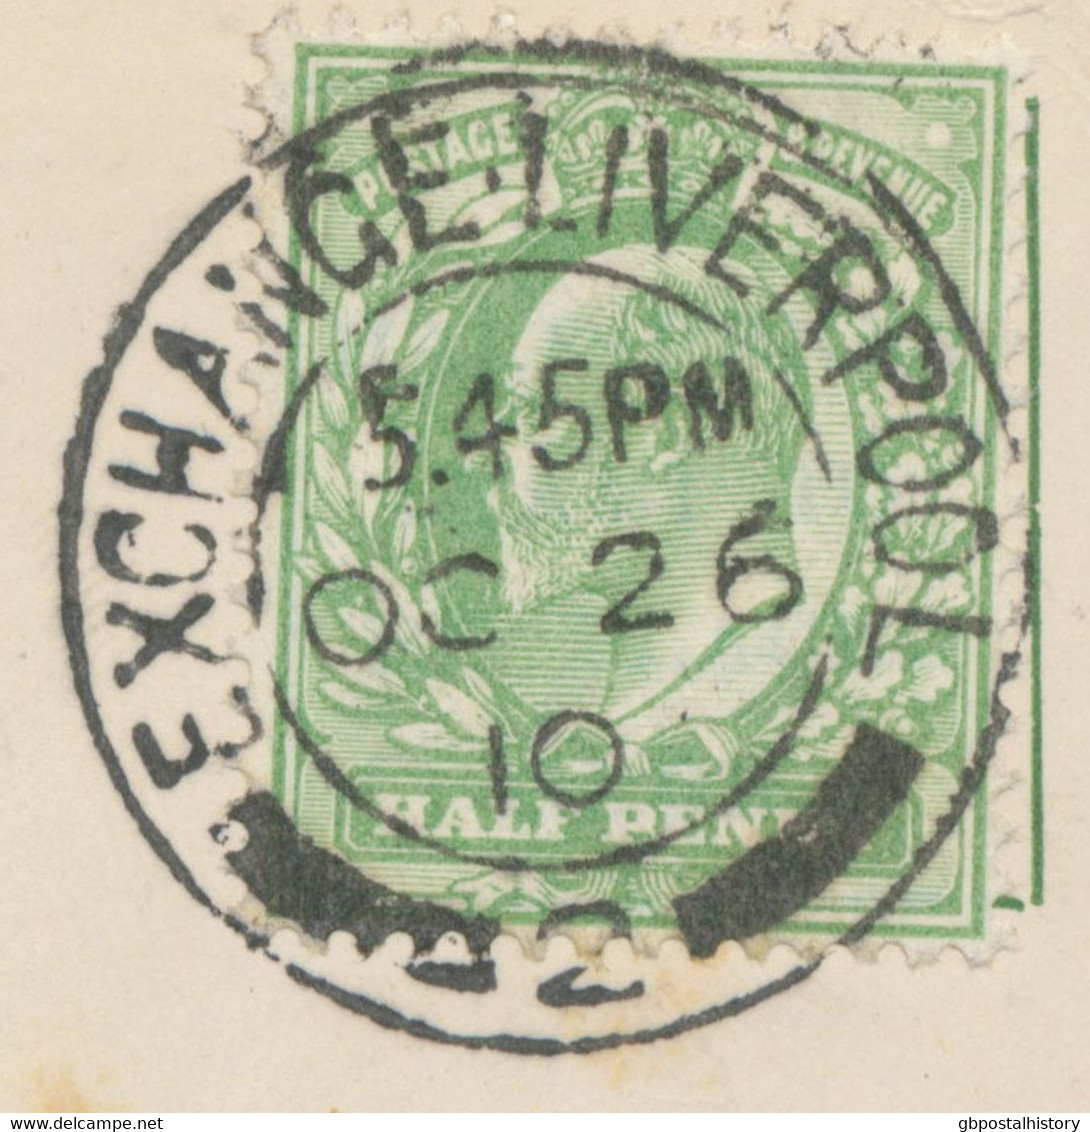 GB „EXCHANGE-LIVERPOOL / 2“ CDS Double Circle 25mm On Superb Postcard With EVII ½ To LEEDS, 26.10.1910 - Briefe U. Dokumente